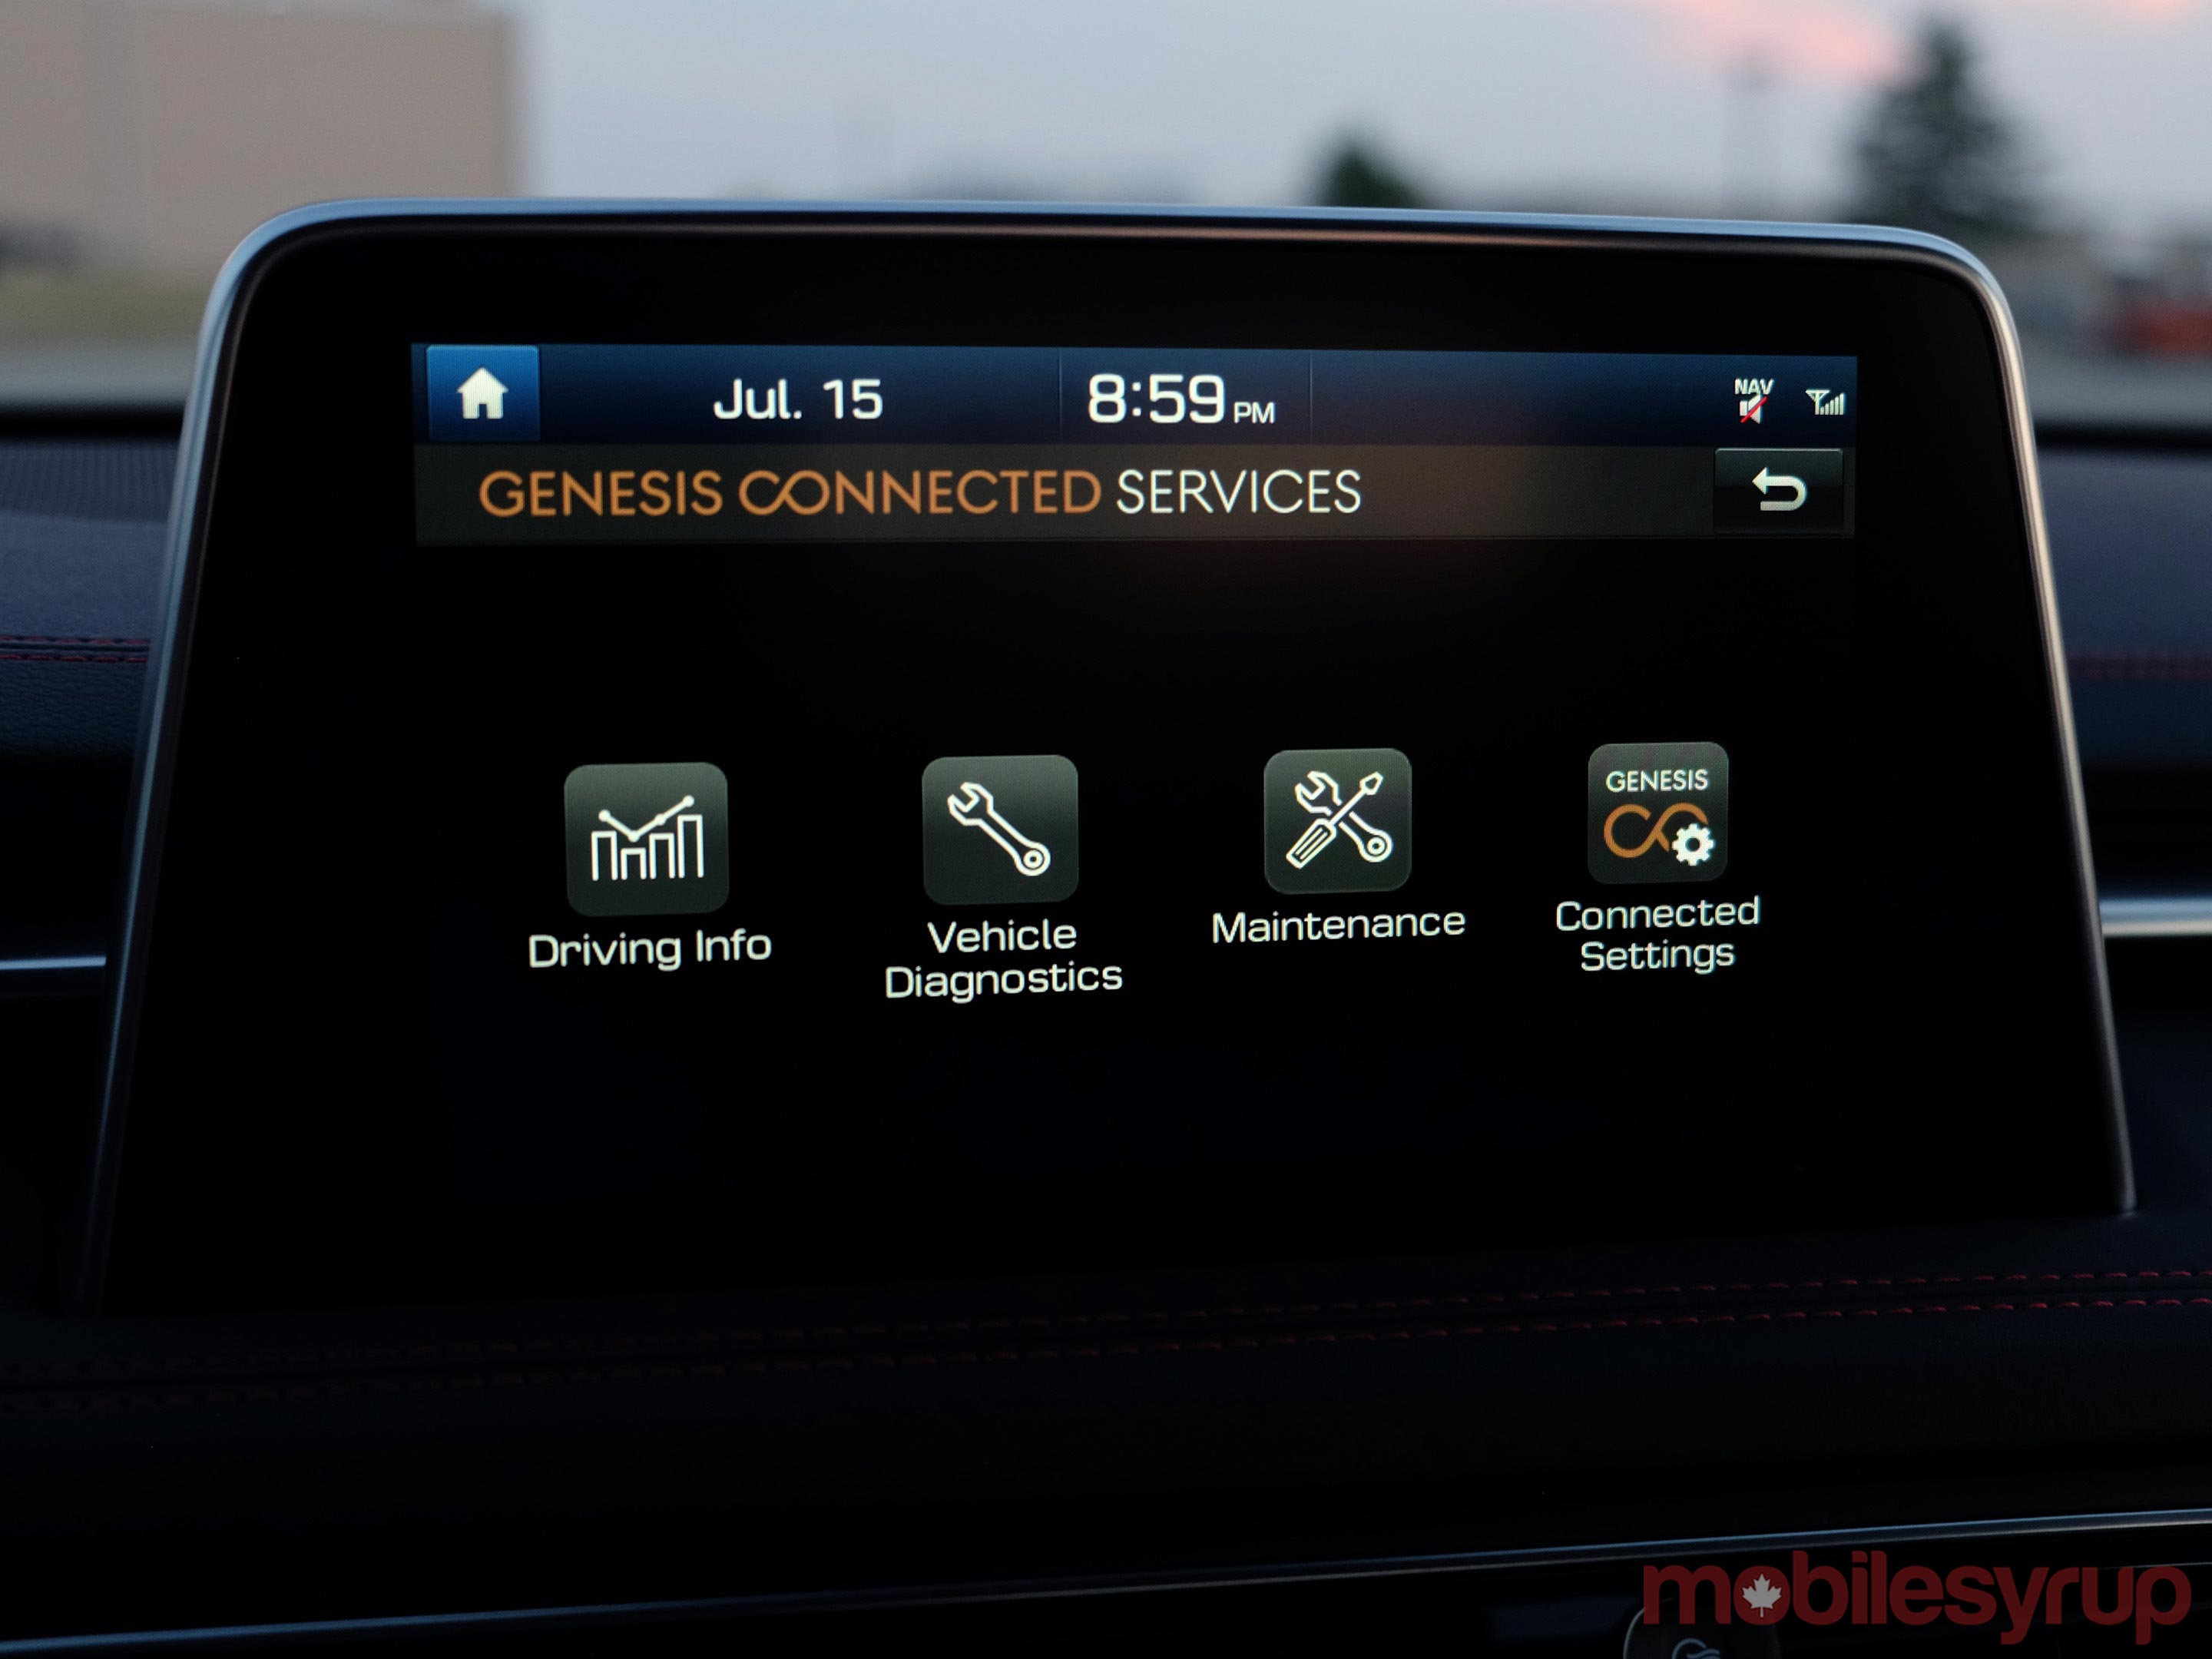 Hyundai Genesis G70 connected services